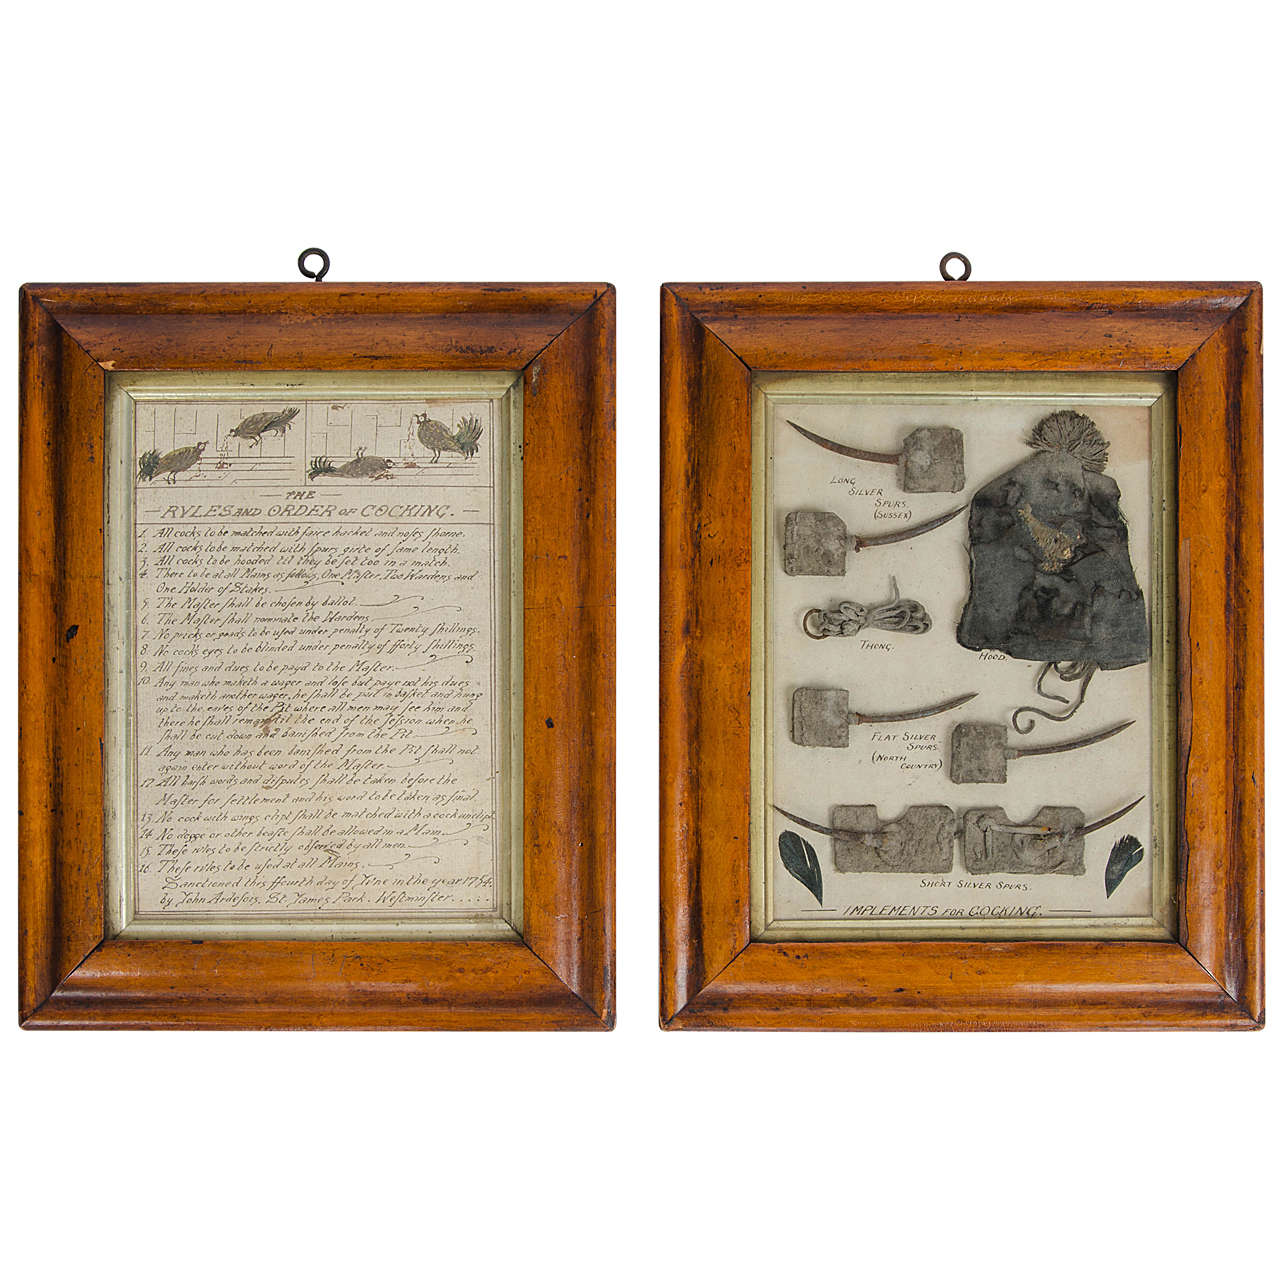 Mid 18th century English Cockfighting. For Sale